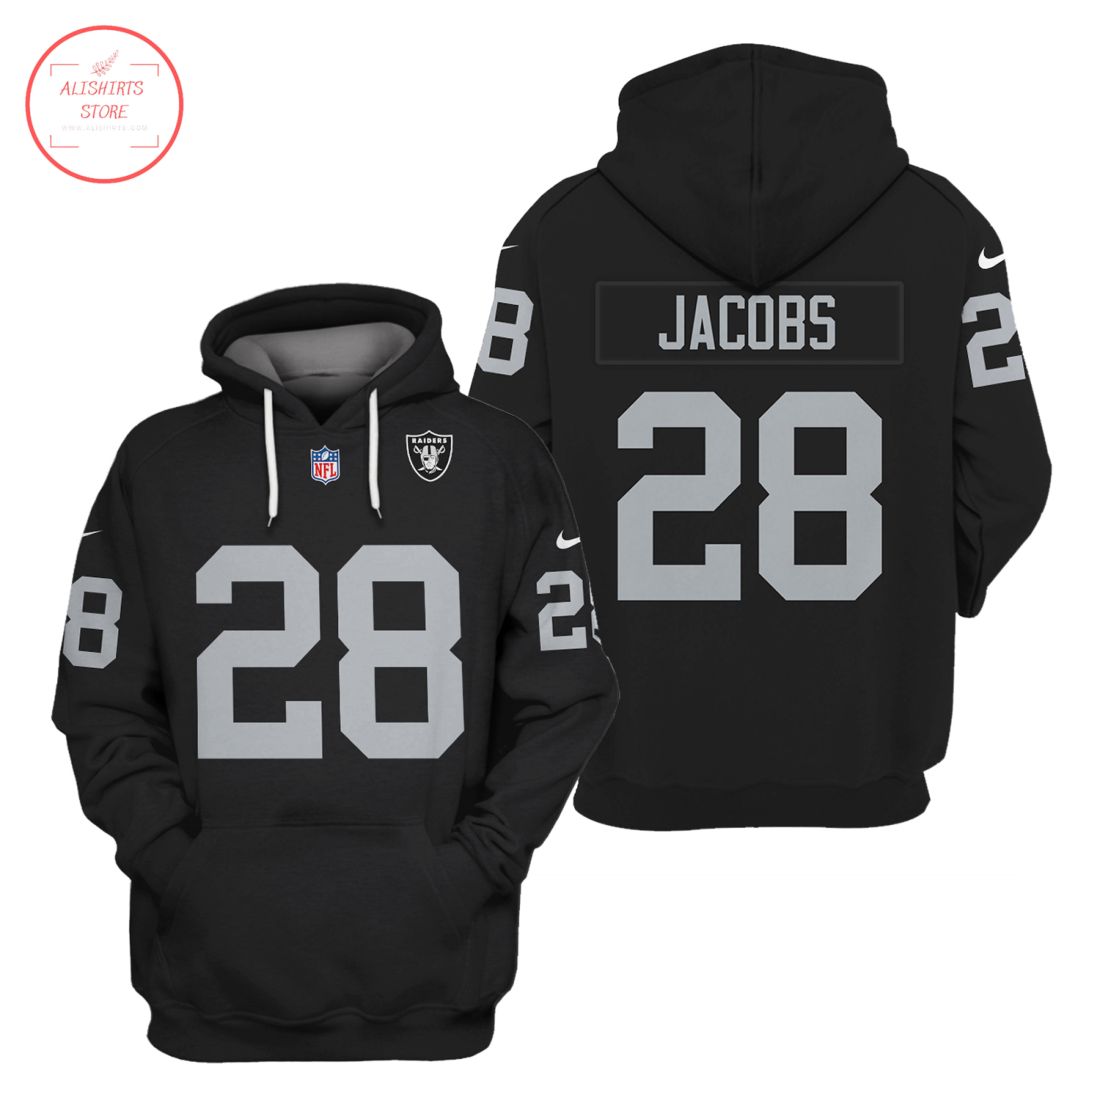 NFL Oakland Raiders Jacobs Shirt and Hoodie